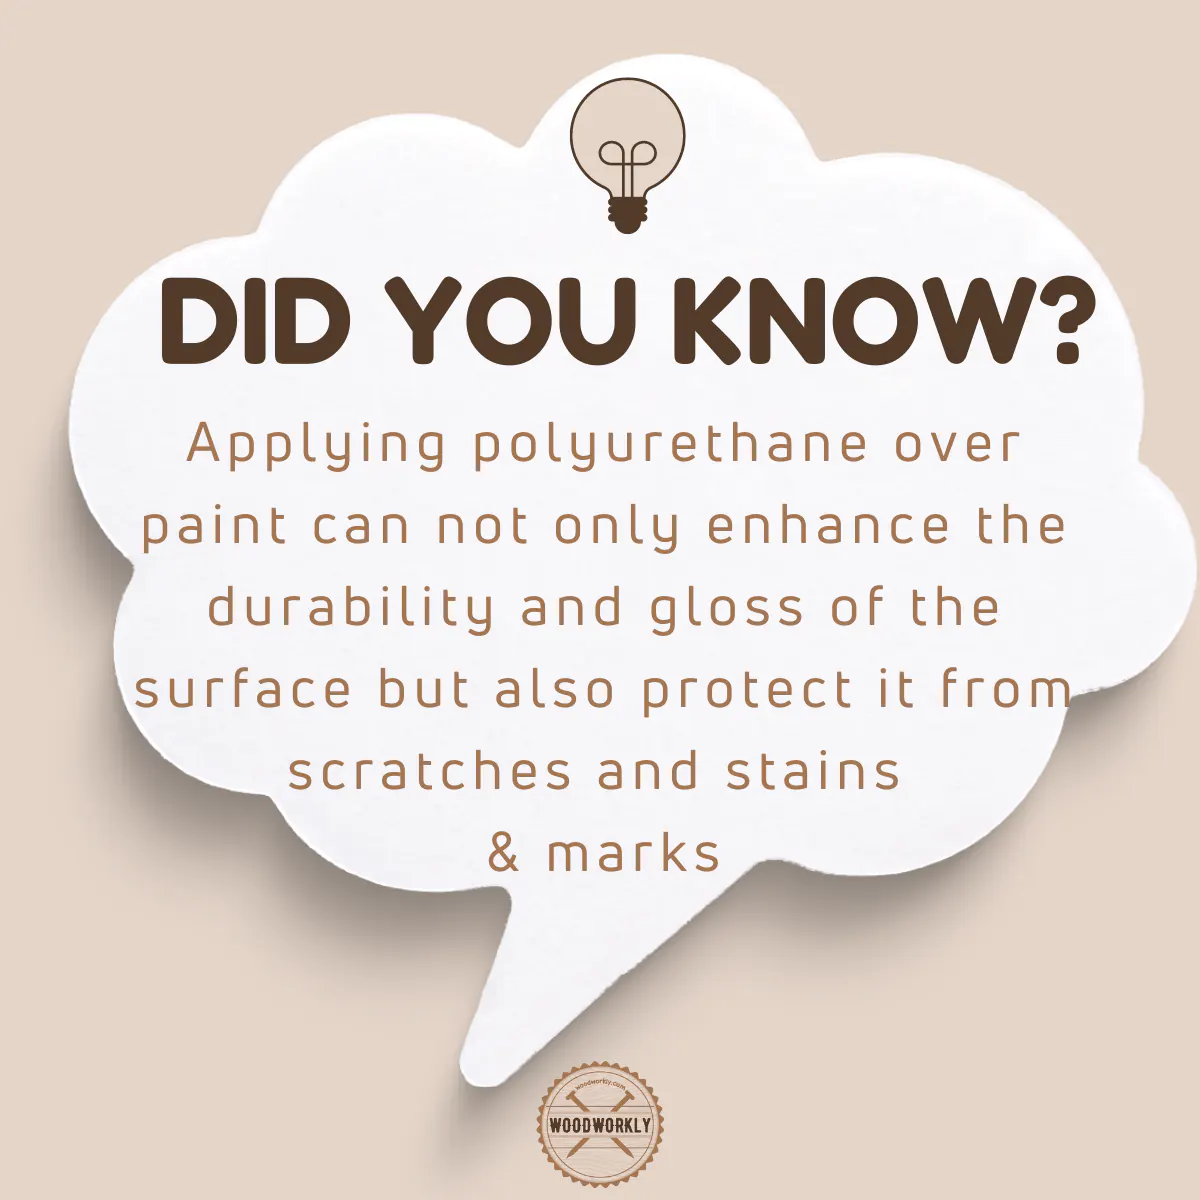 Did you know fact about using Polyurethane Over Paint